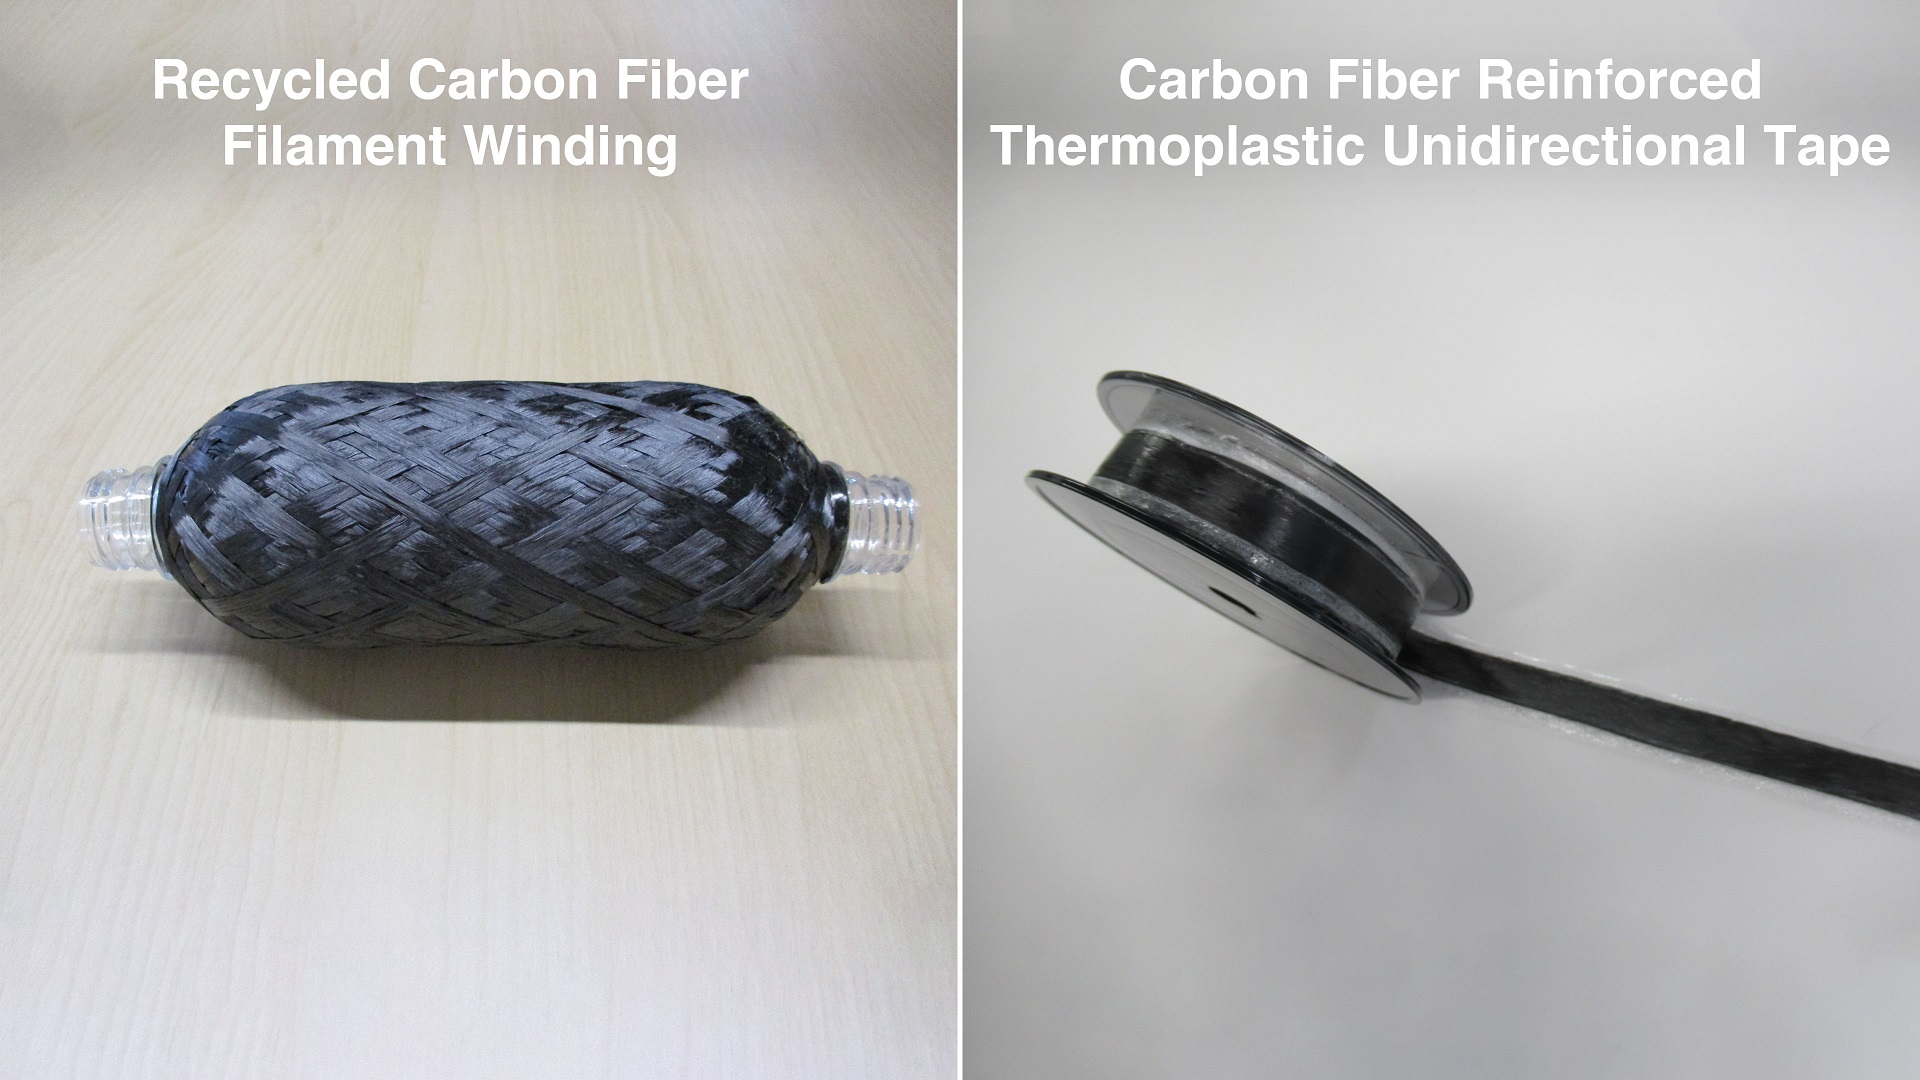 recycled carbon fiber filament winding, carbon fiber reinforced thermoplastic unidirectional tape